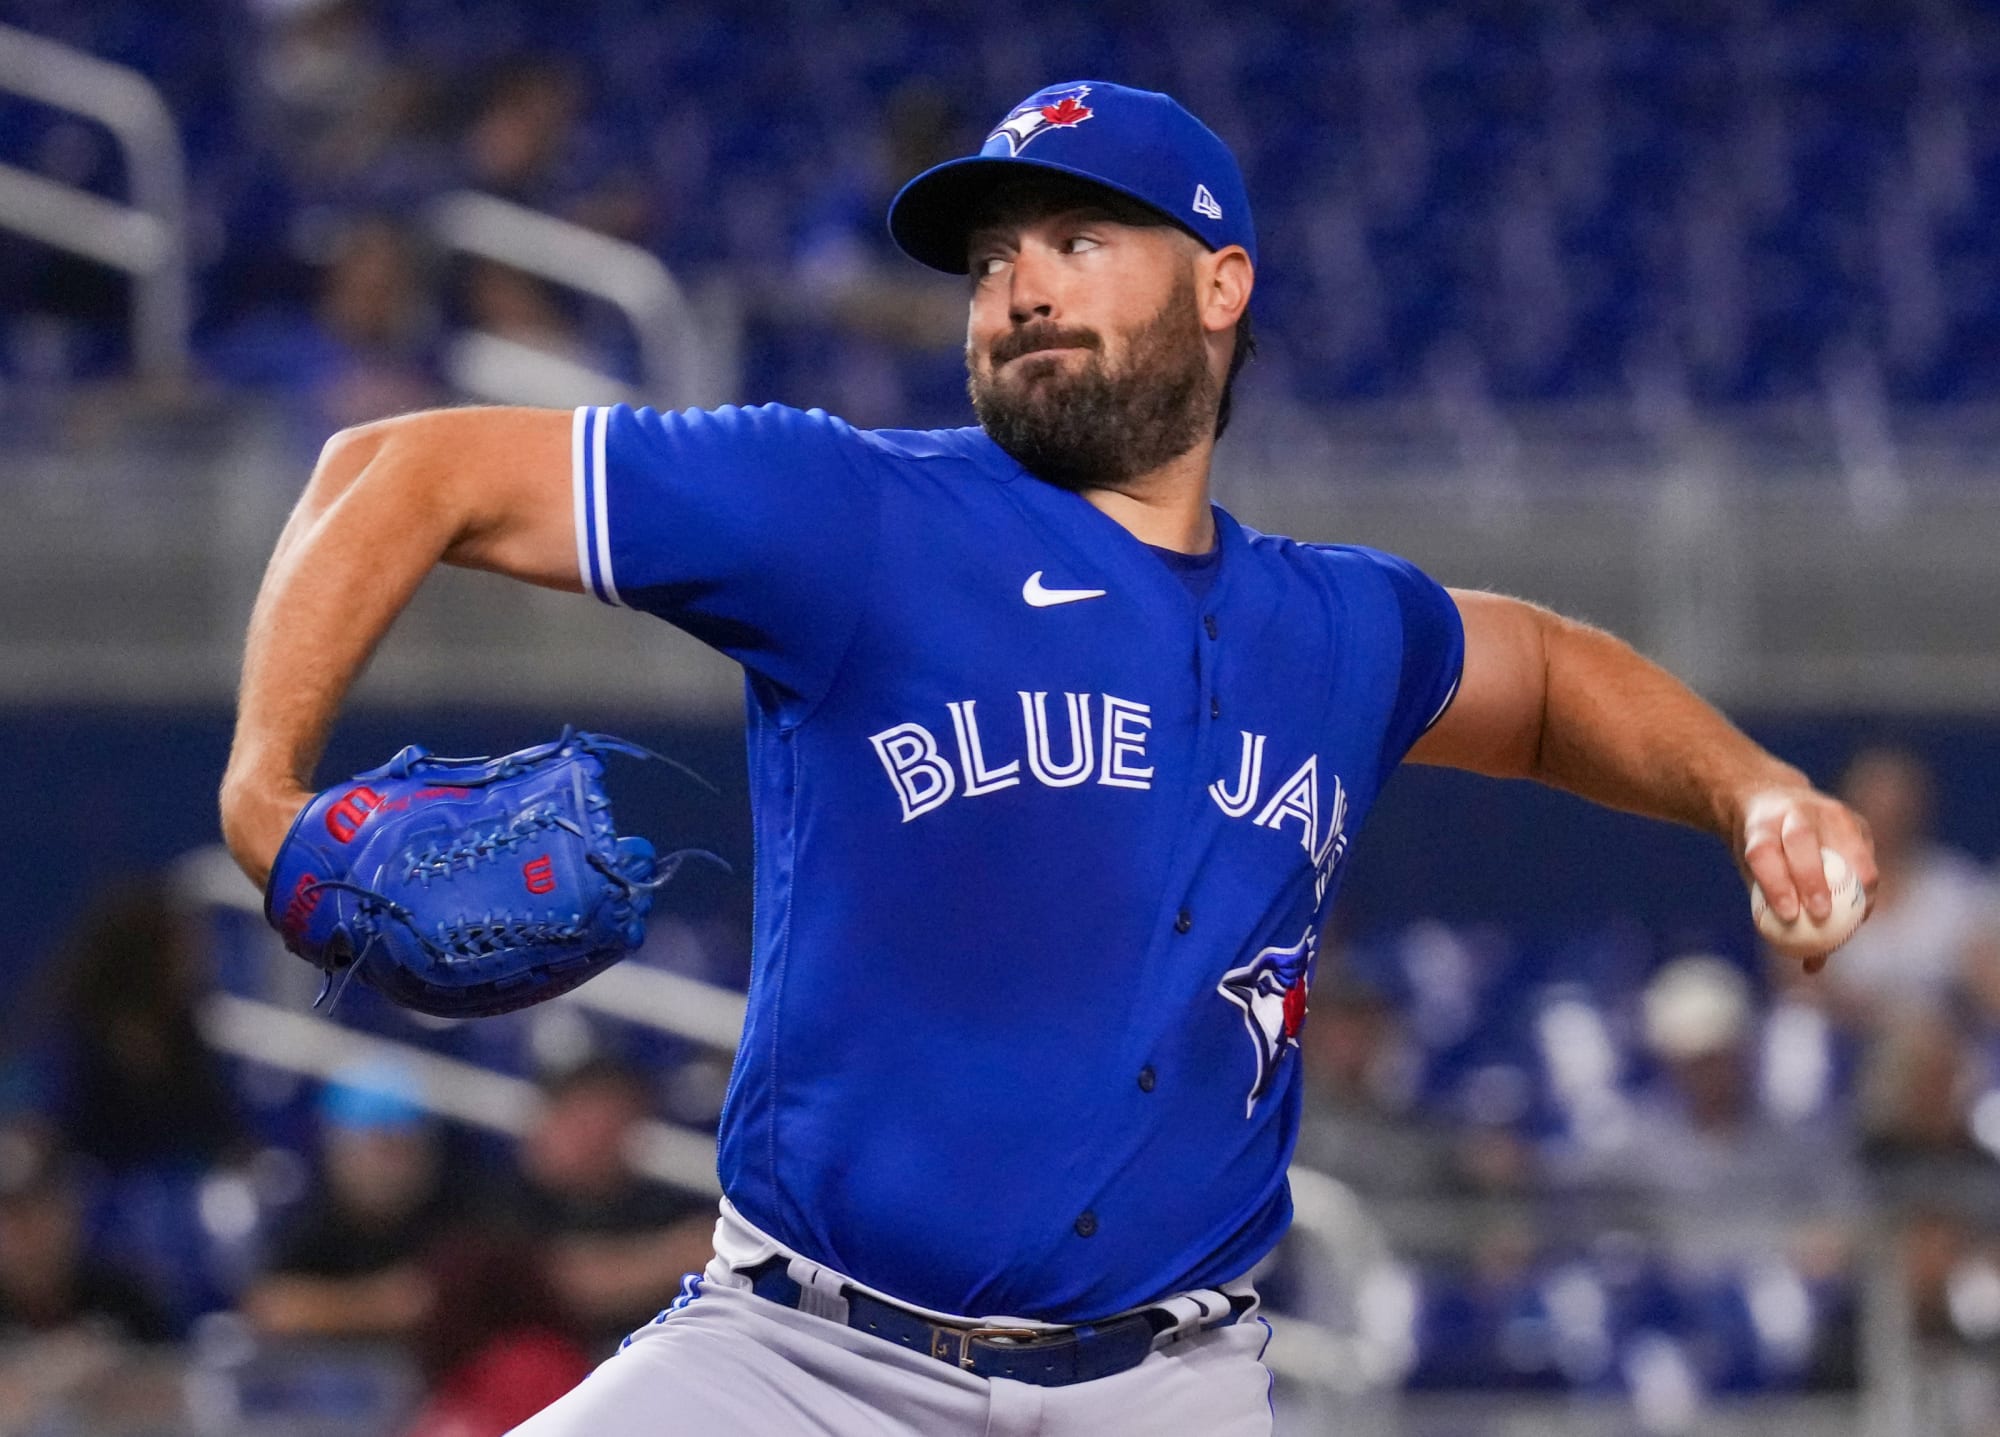 Blue Jays pitchers haven't been affected by sticky substance crackdown